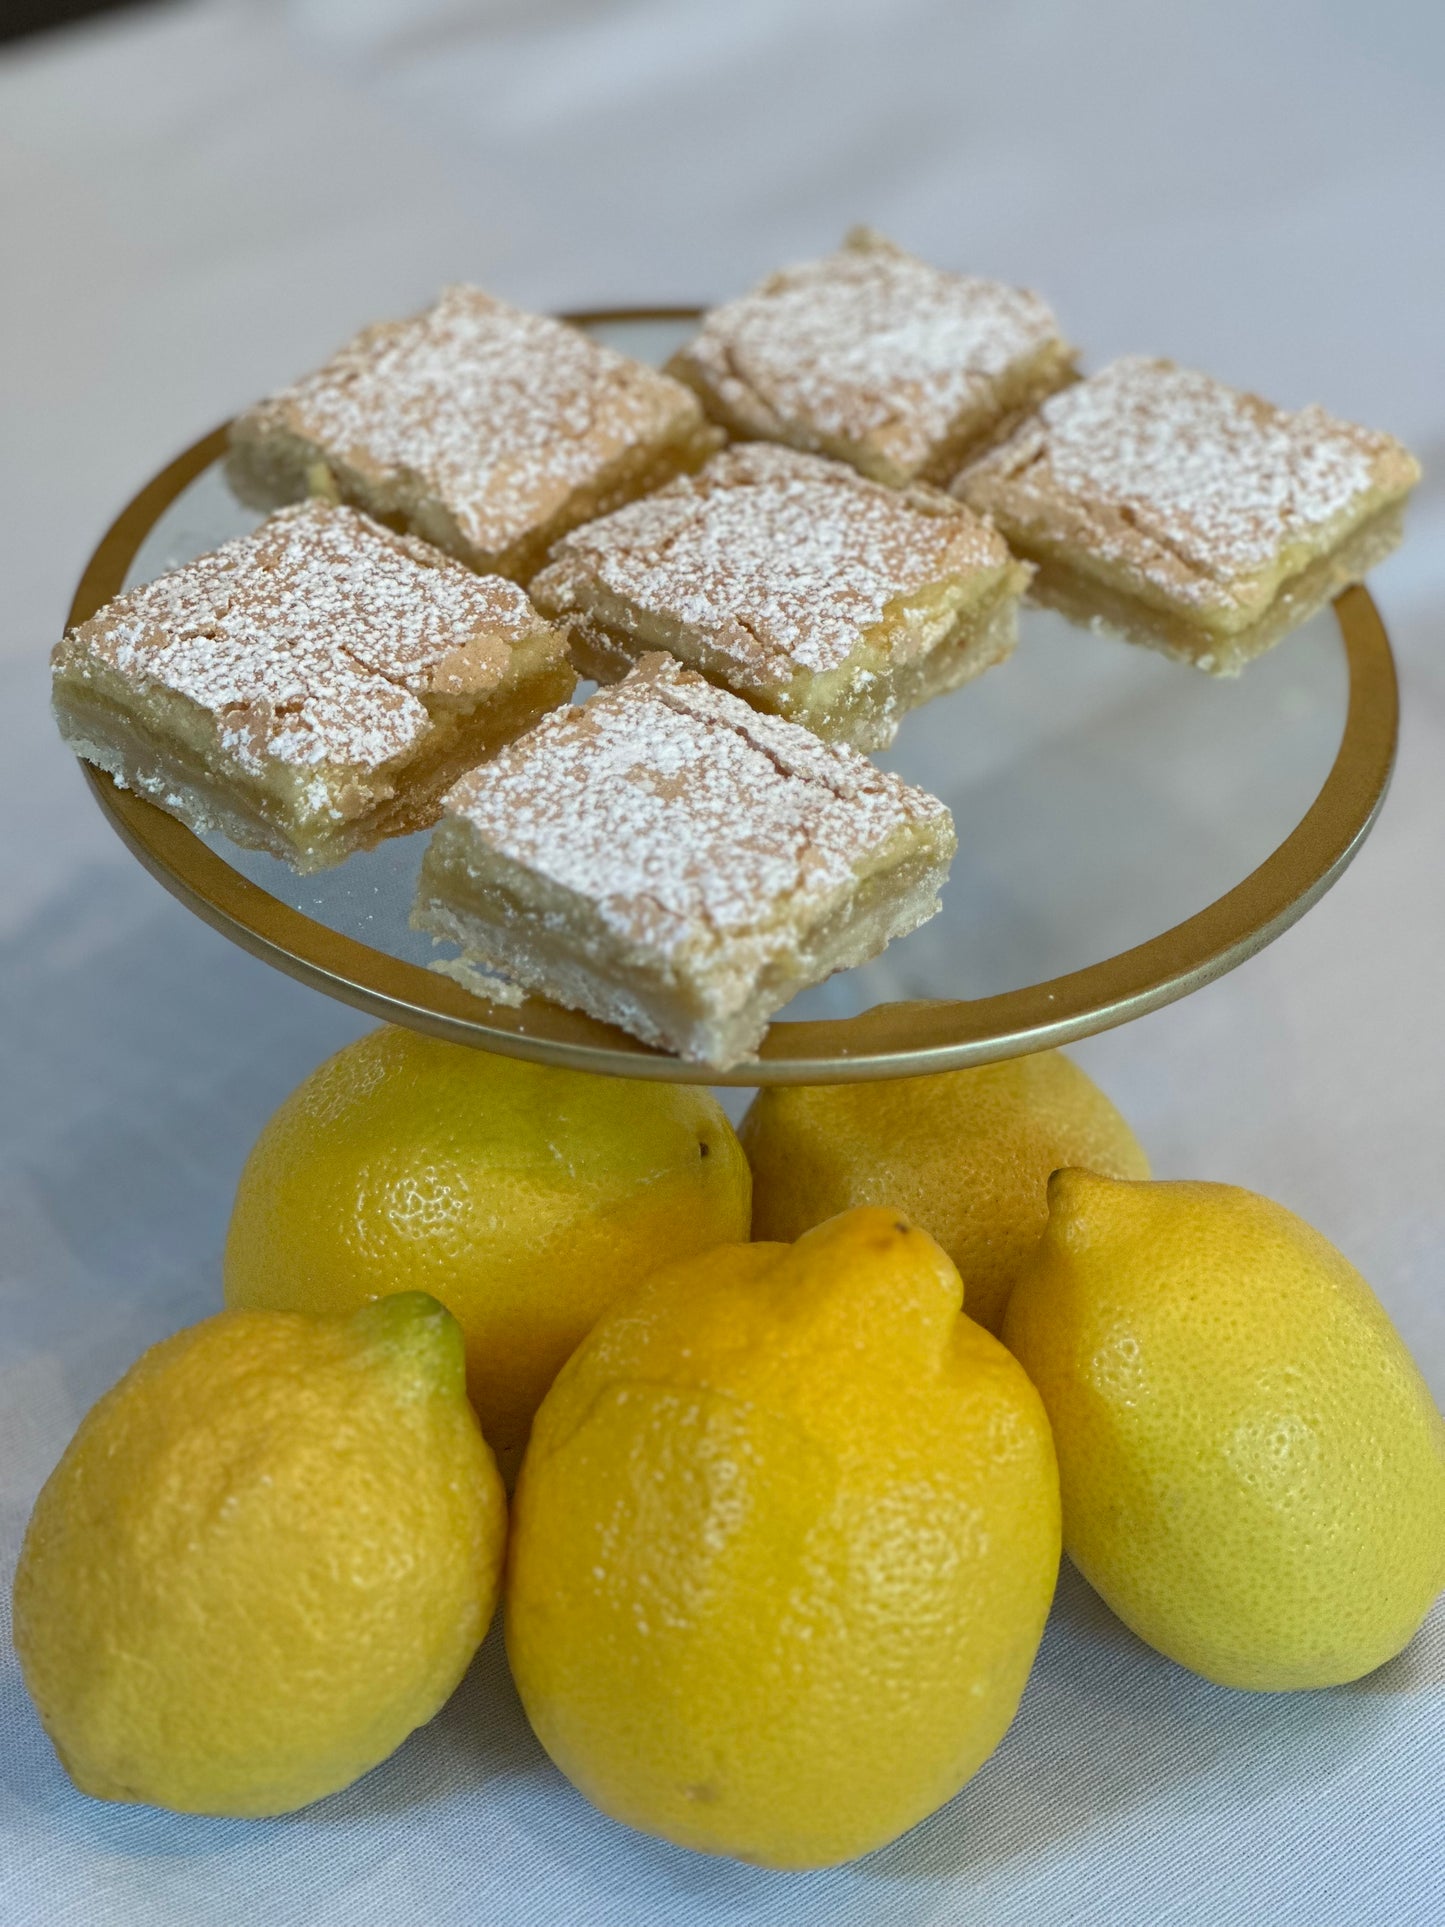 Lemon Bars (2 Dozen)  |  Contact us to arrange pick up. Please allow at least 2 business days for order processing.